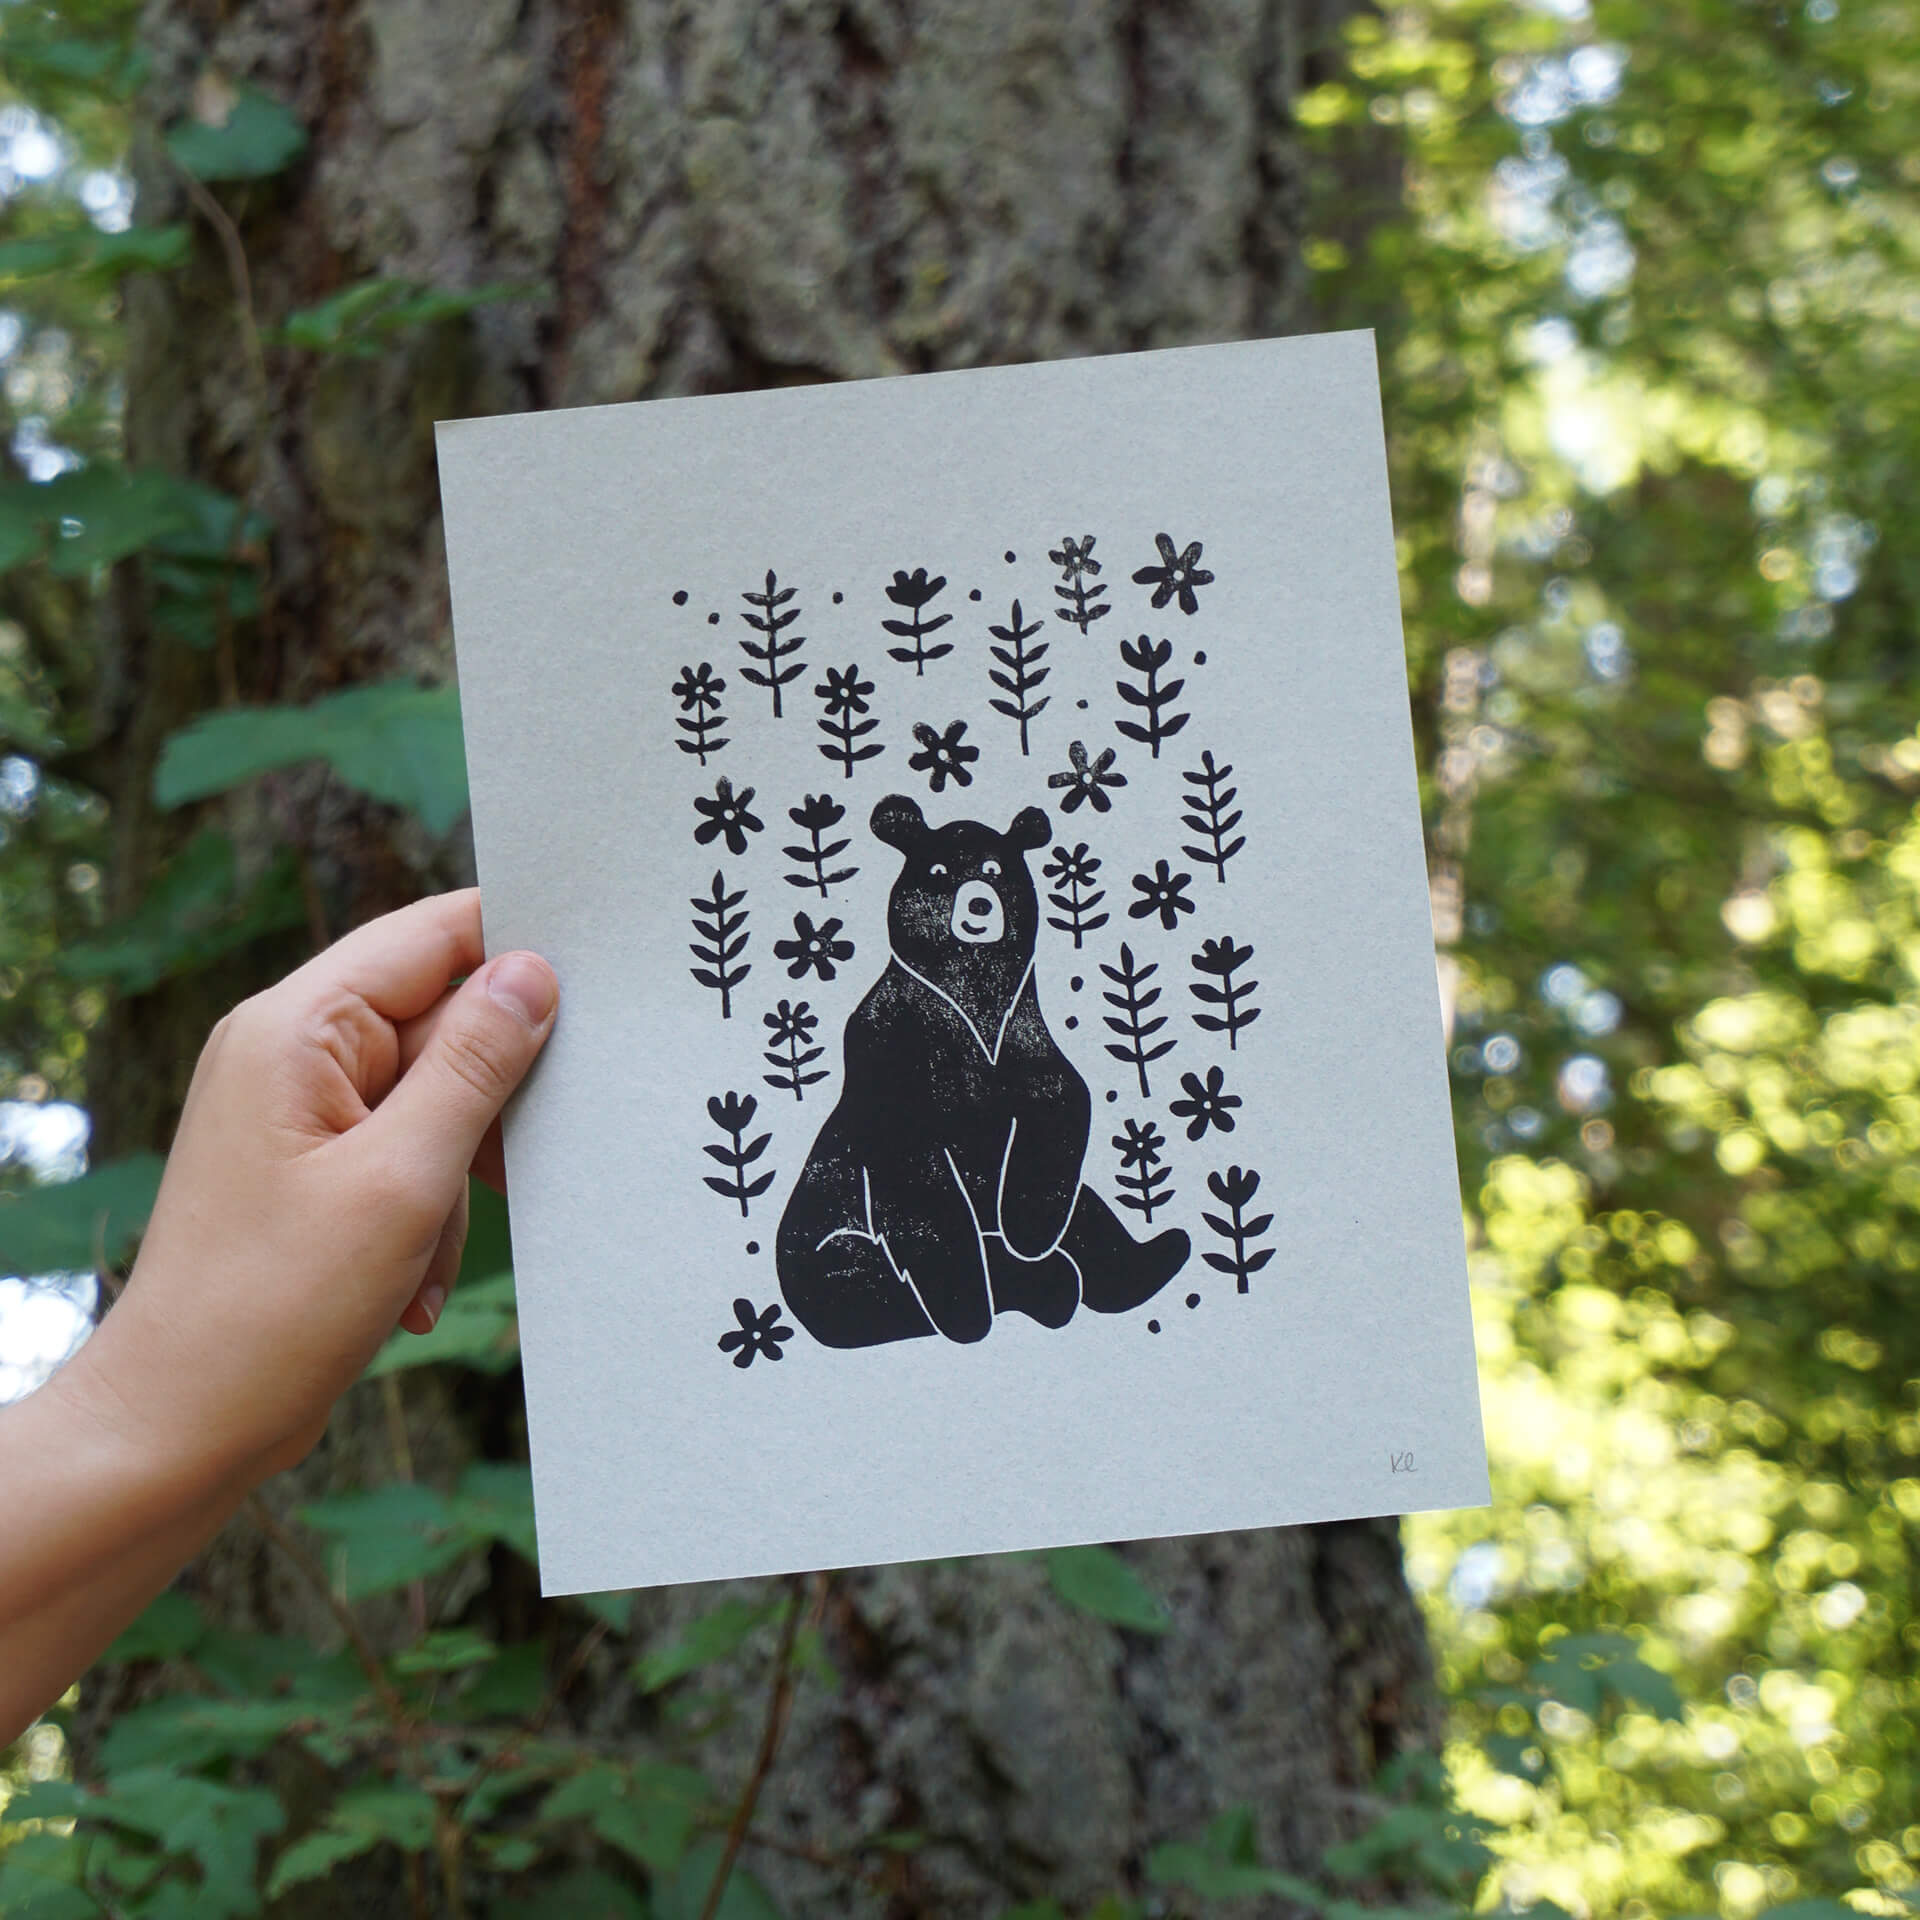 A hand holds up a linocut print of a bear sitting among flowers